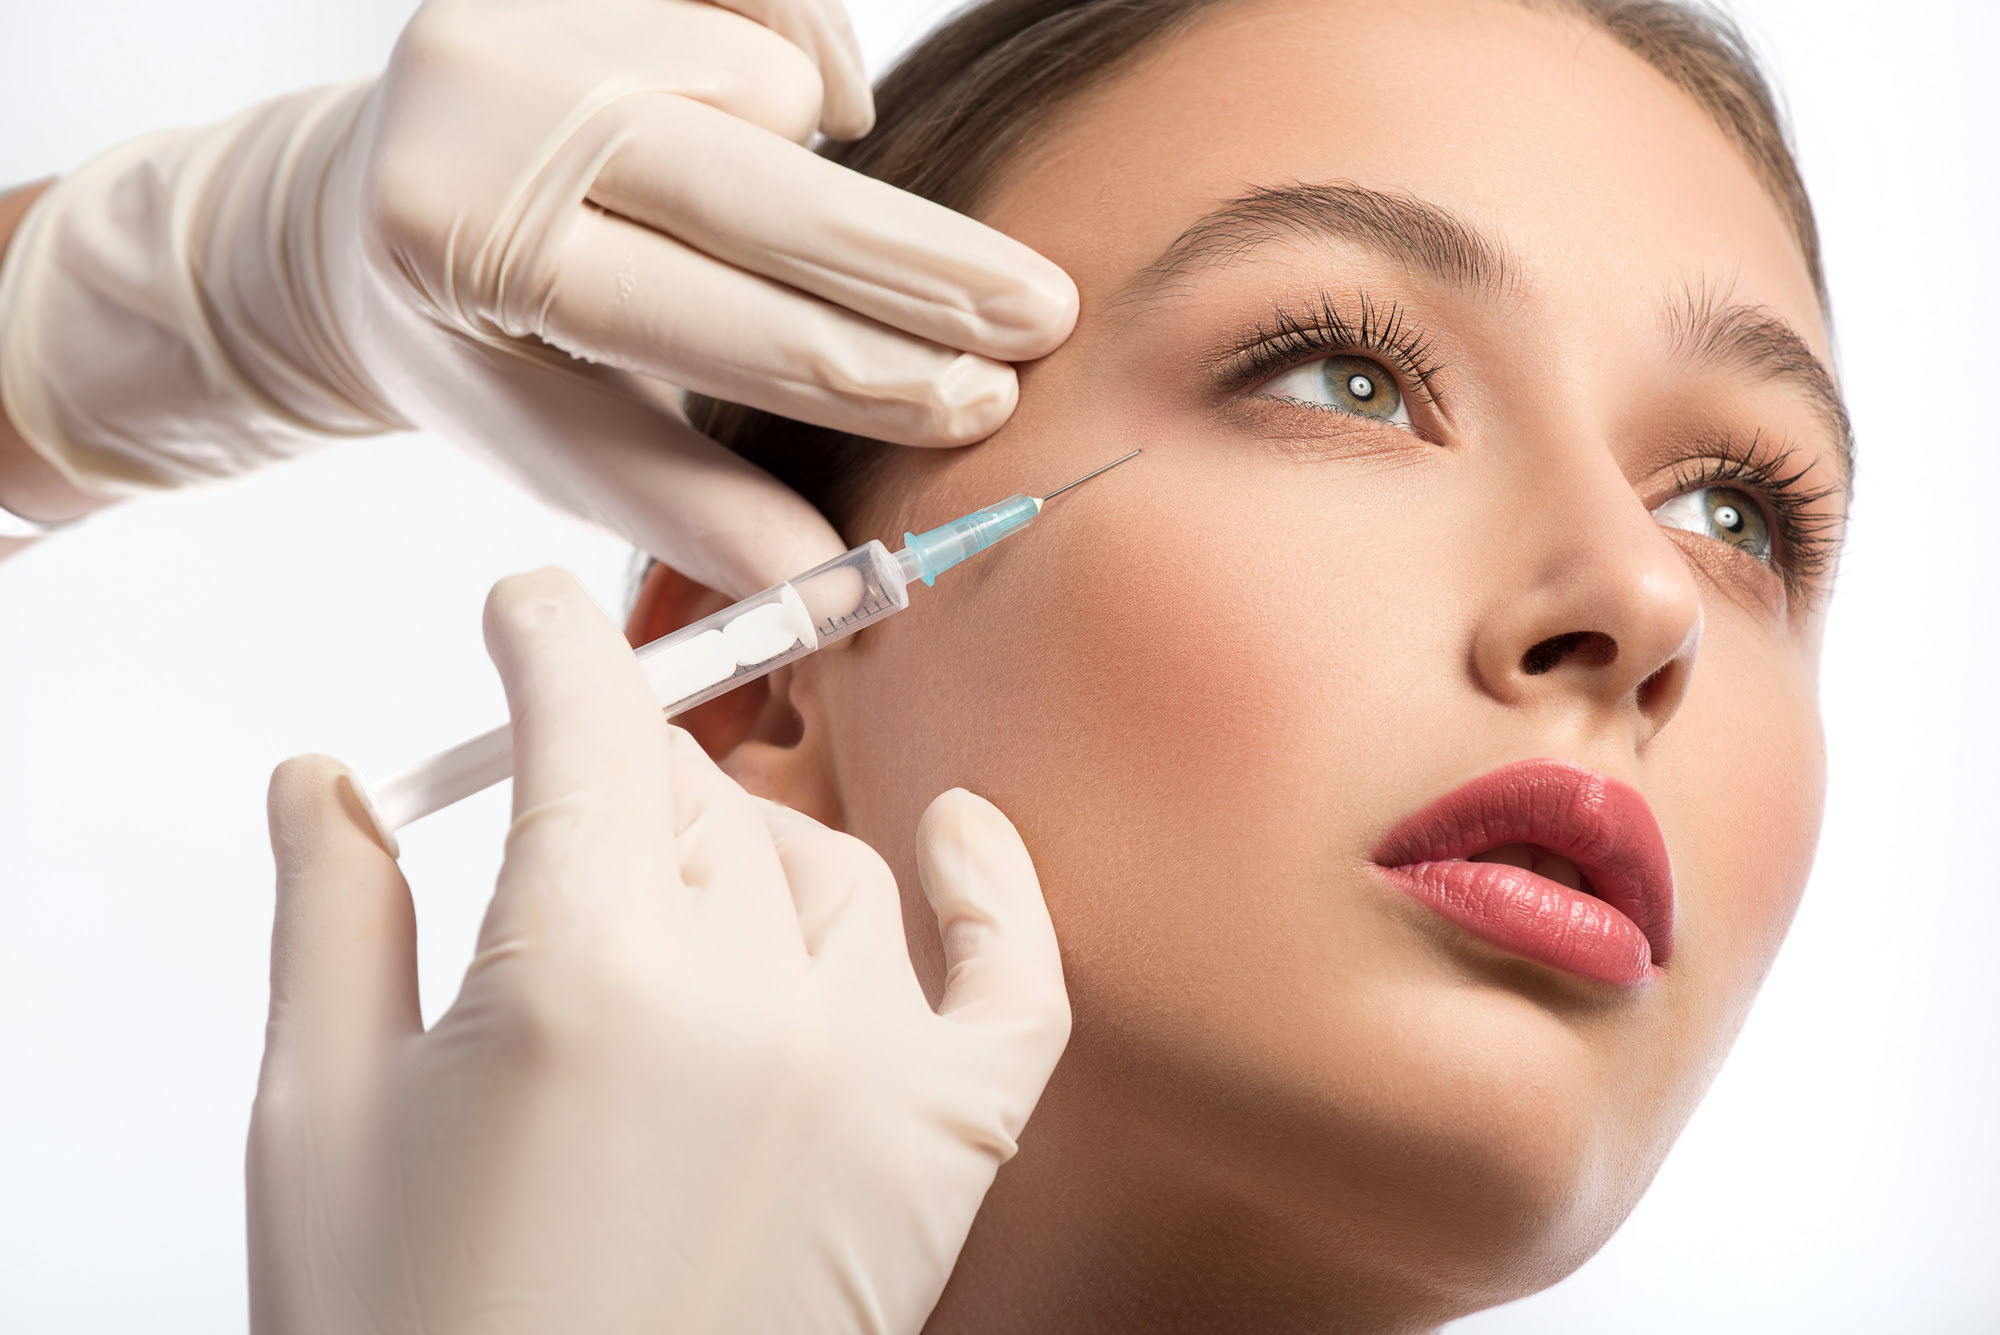 A scene of medical cosmetology treatments botox injection | Coral Springs Med Spa in Coral Springs, FL